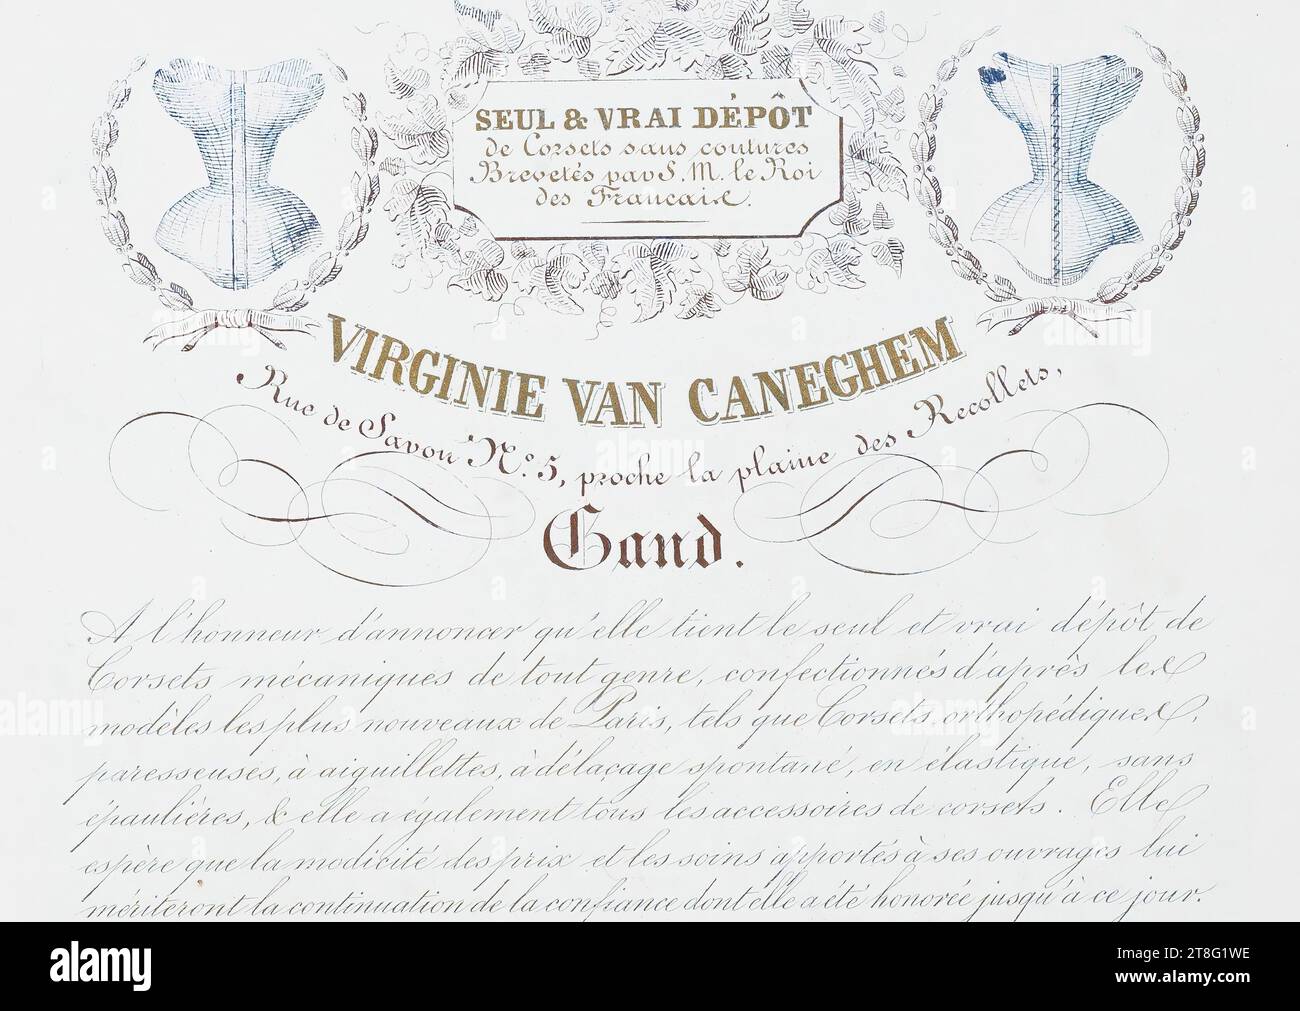 Advertising prints. SOLE & REAL DEPOSIT, of Corsets without seams, Patented by S. M. the King, of the French. VIRGINIE VAN CANEGHEM, Rie de Soap N°. 5, near the Recollets plain, GHENT. Has the honor to announce that it holds the only and true deposit of, Mechanical corsets of all kinds, made according to the newest models of Paris, such as orthopedic corsets, lazy, with aiguillettes, with spontaneous unlacing , in elastic, without, shoulder pads Stock Photo